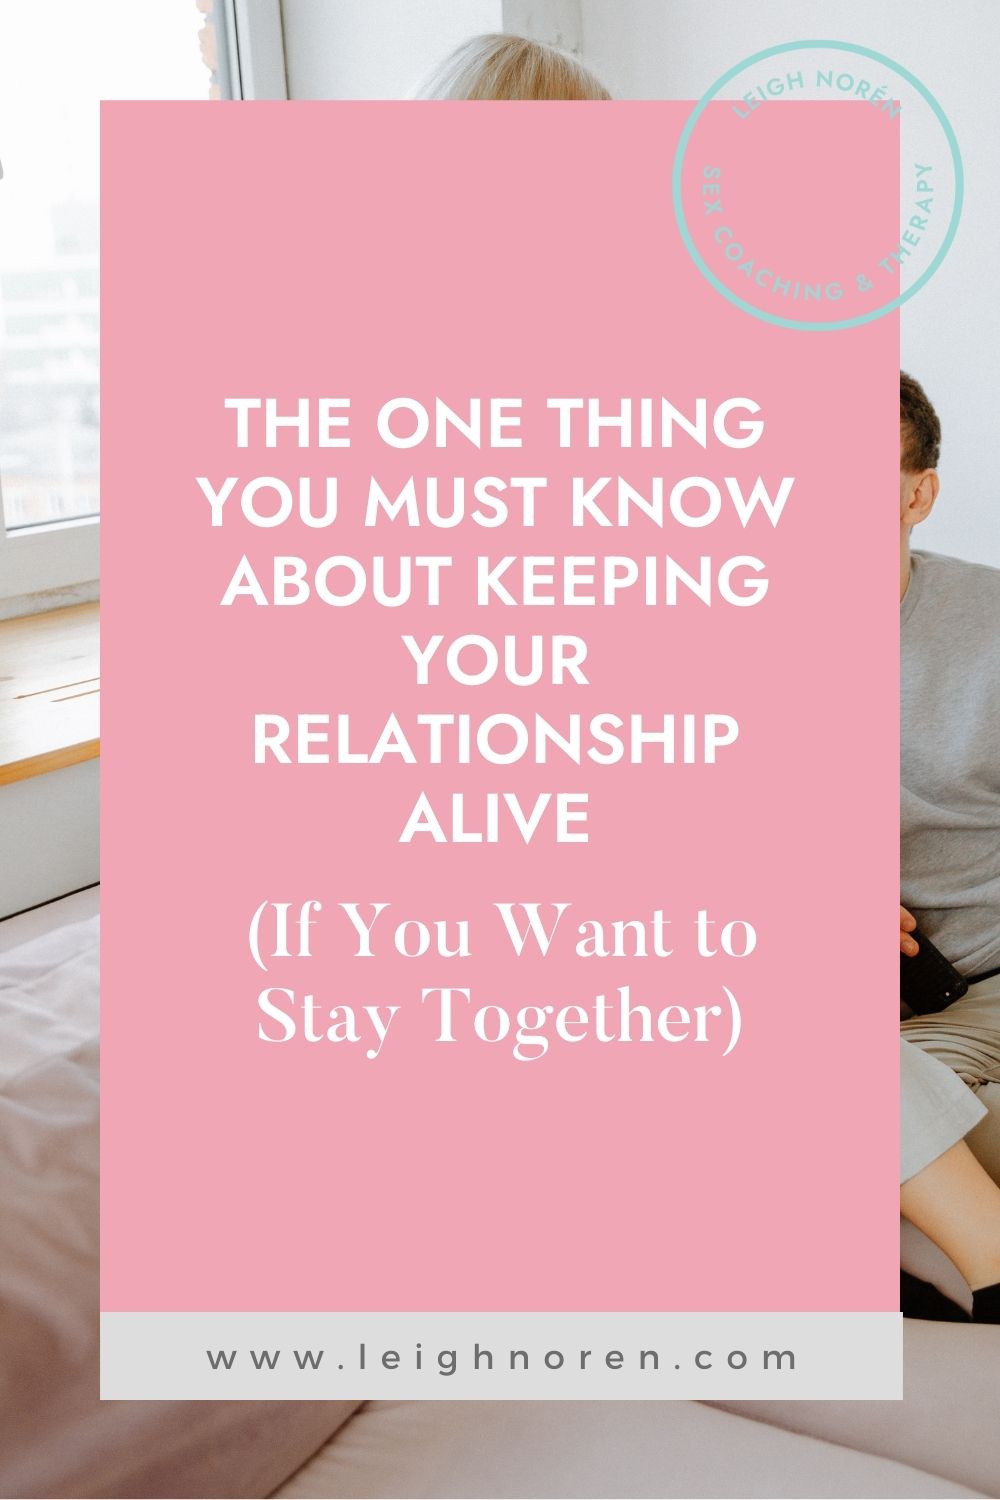 The One Thing You Must Know About Keeping Your Relationship Alive (If You Want to Stay Together)